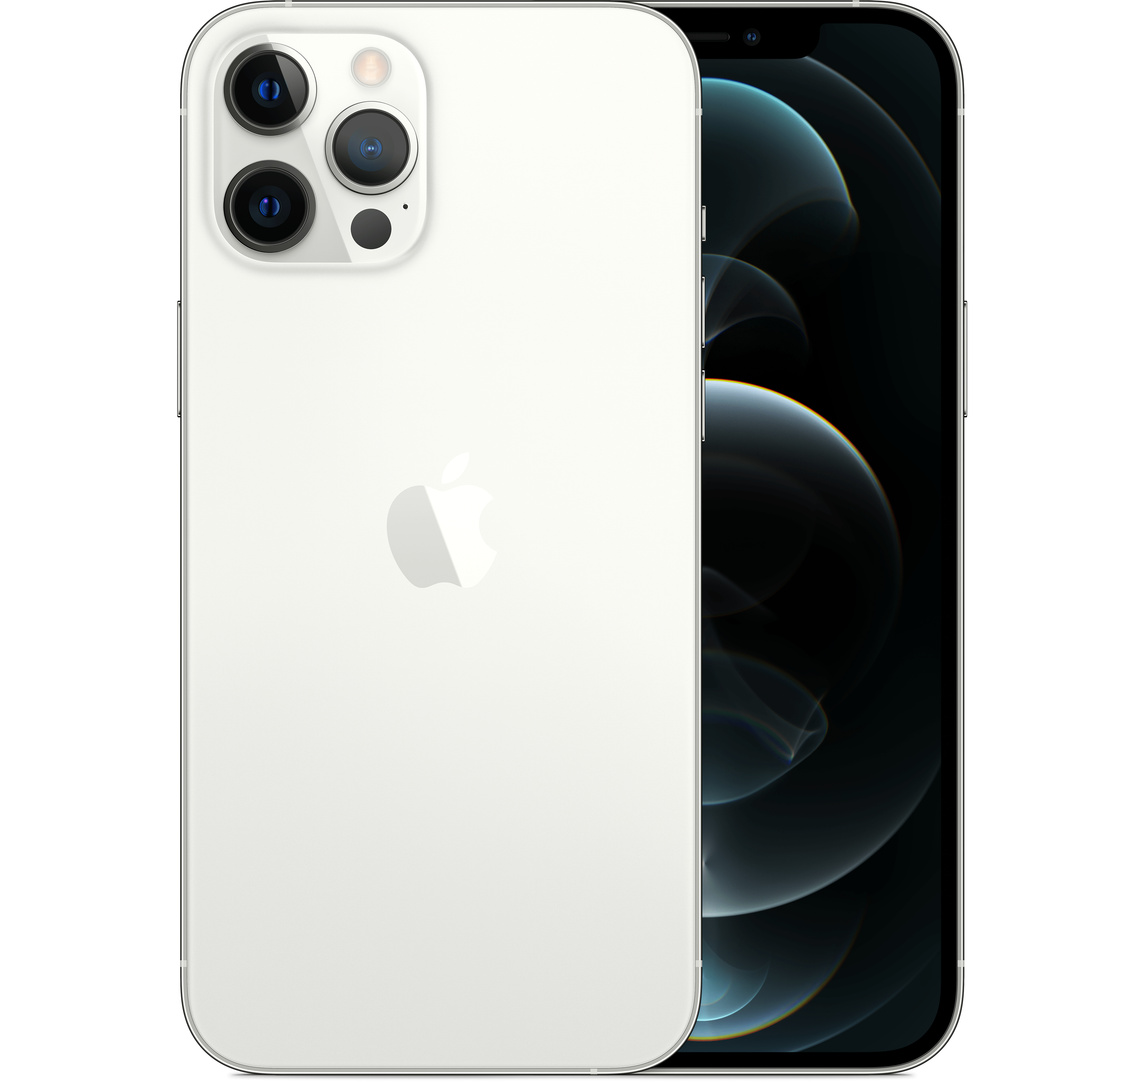 Back, silver iPhone 12 Pro Max, Pro camera system with True Tone flash, microphone. Front, all-screen display